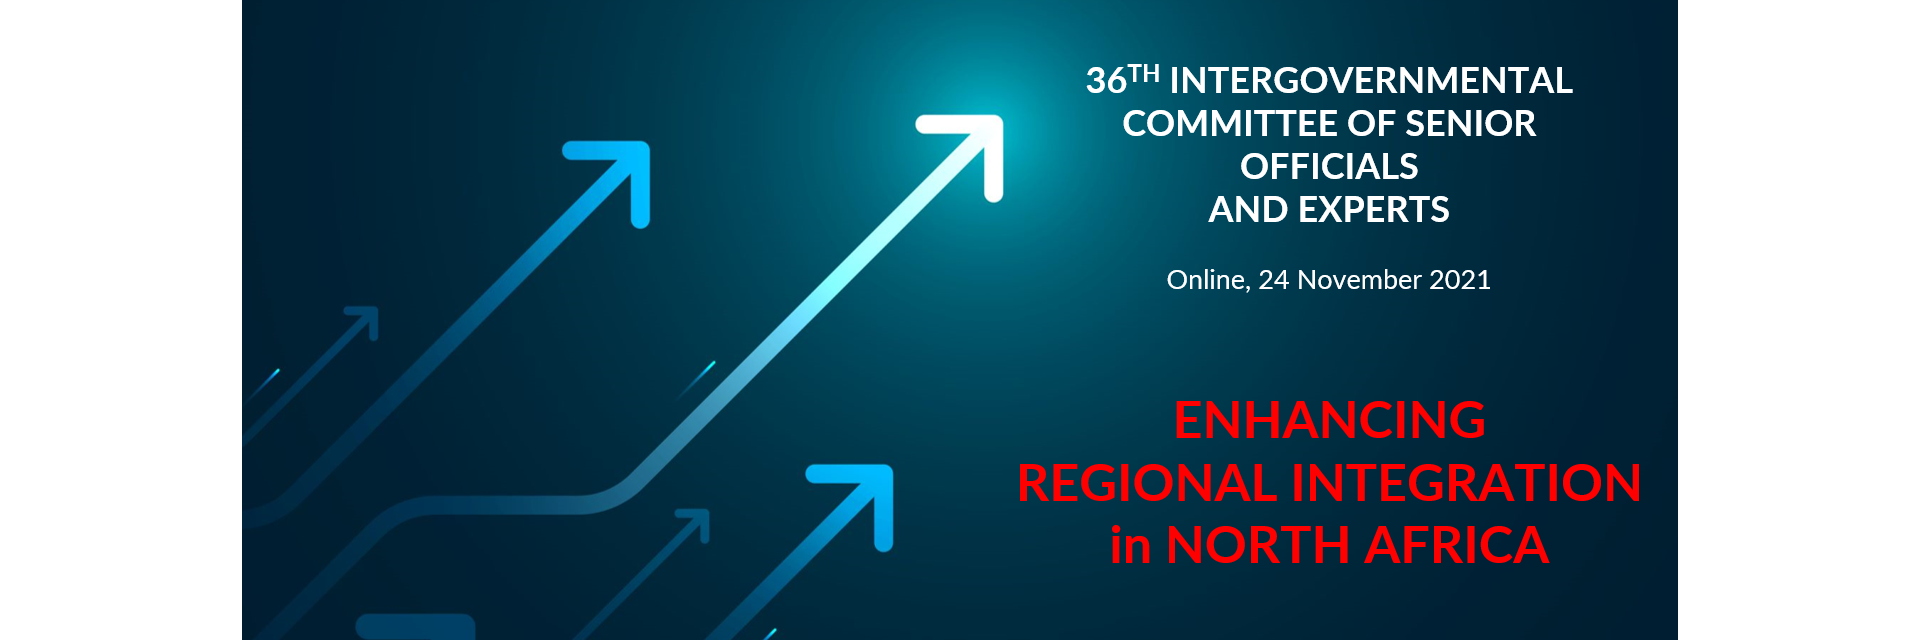 36th Intergovernmental Committee of Senior Officials and Experts (ICSOE) for North Africa